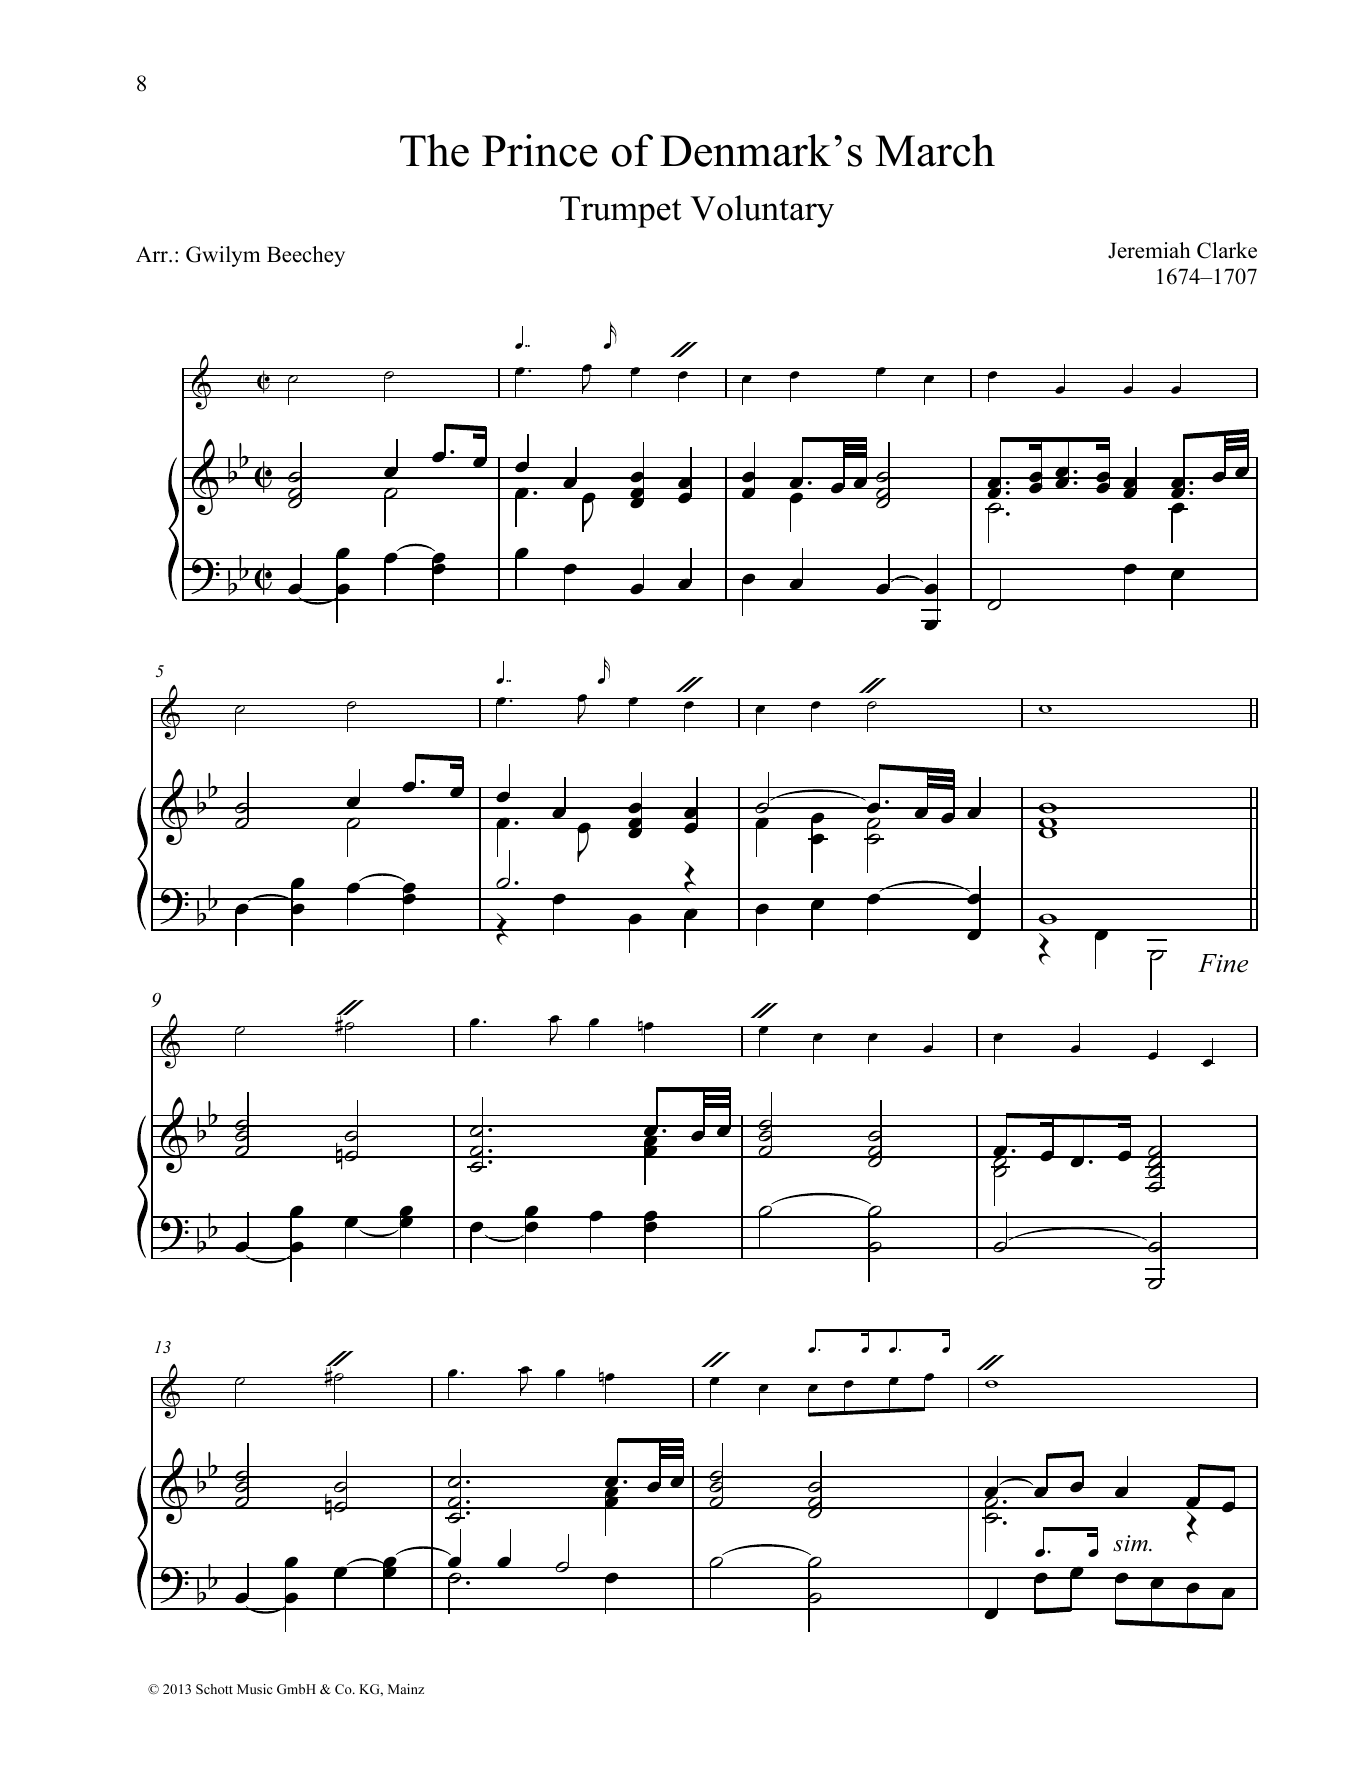 Download Gwilym Beechey The Prince of Denmark's March Sheet Music